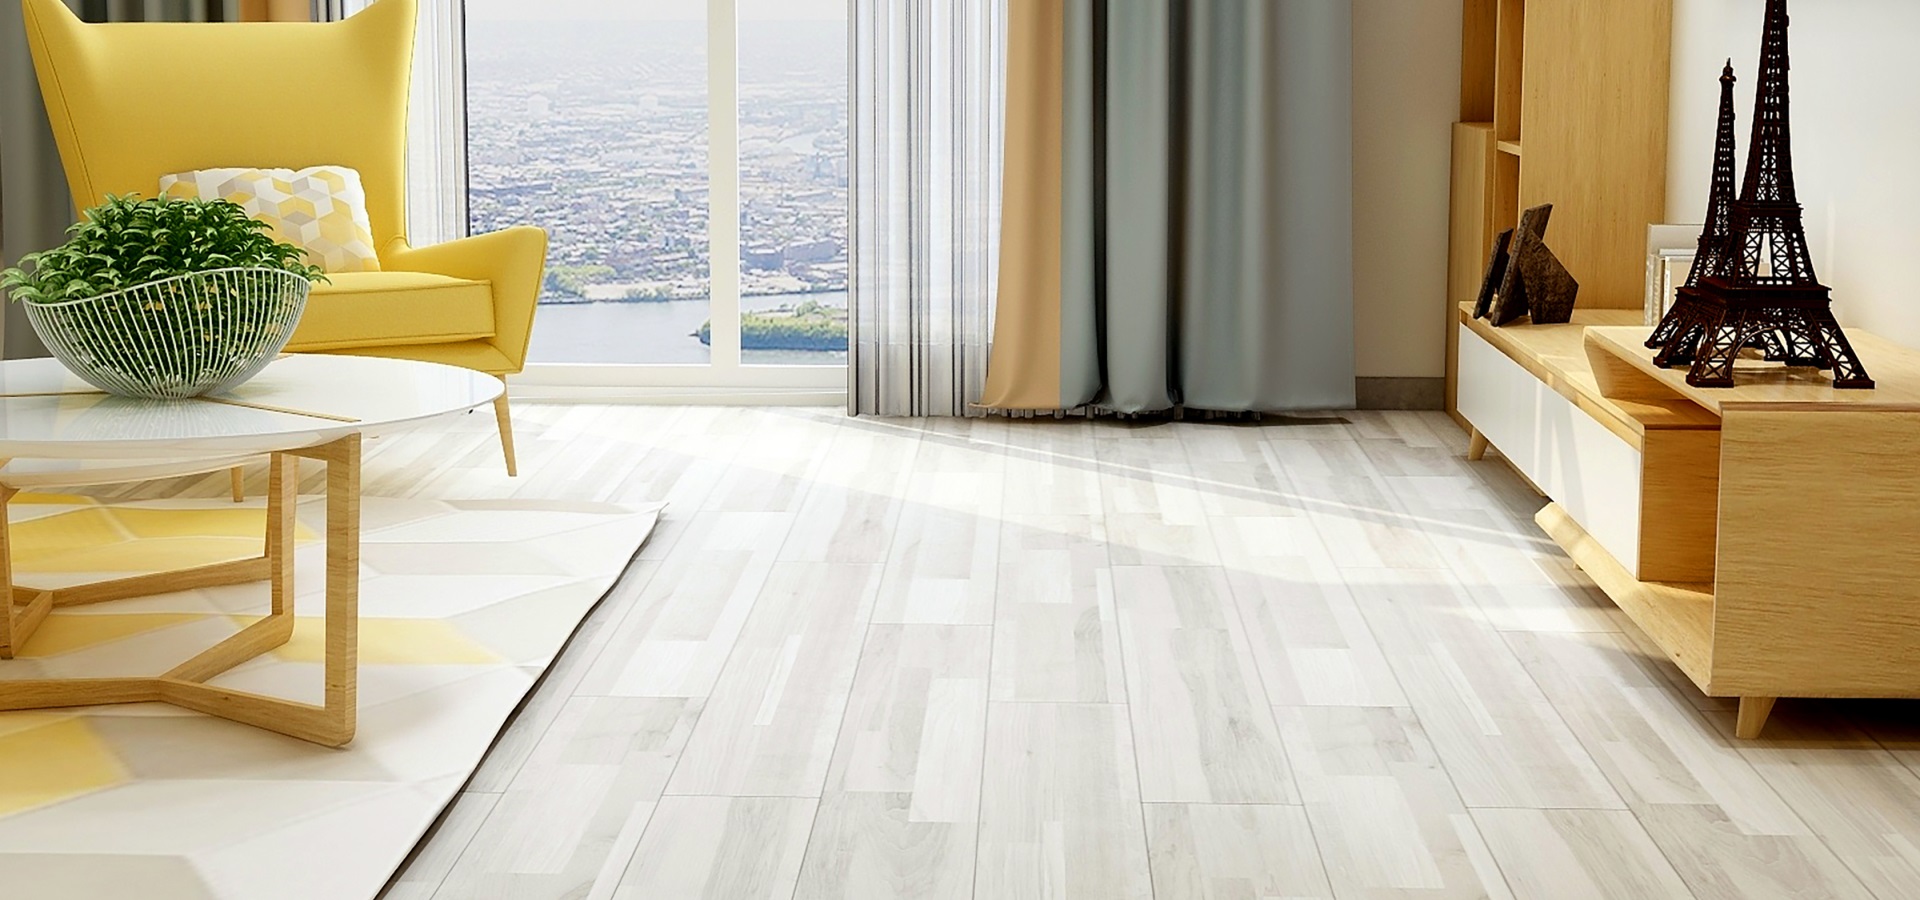 Vinyl Free Resilient Flooring can be applied such as the conventional luxury vinyl floorings do.